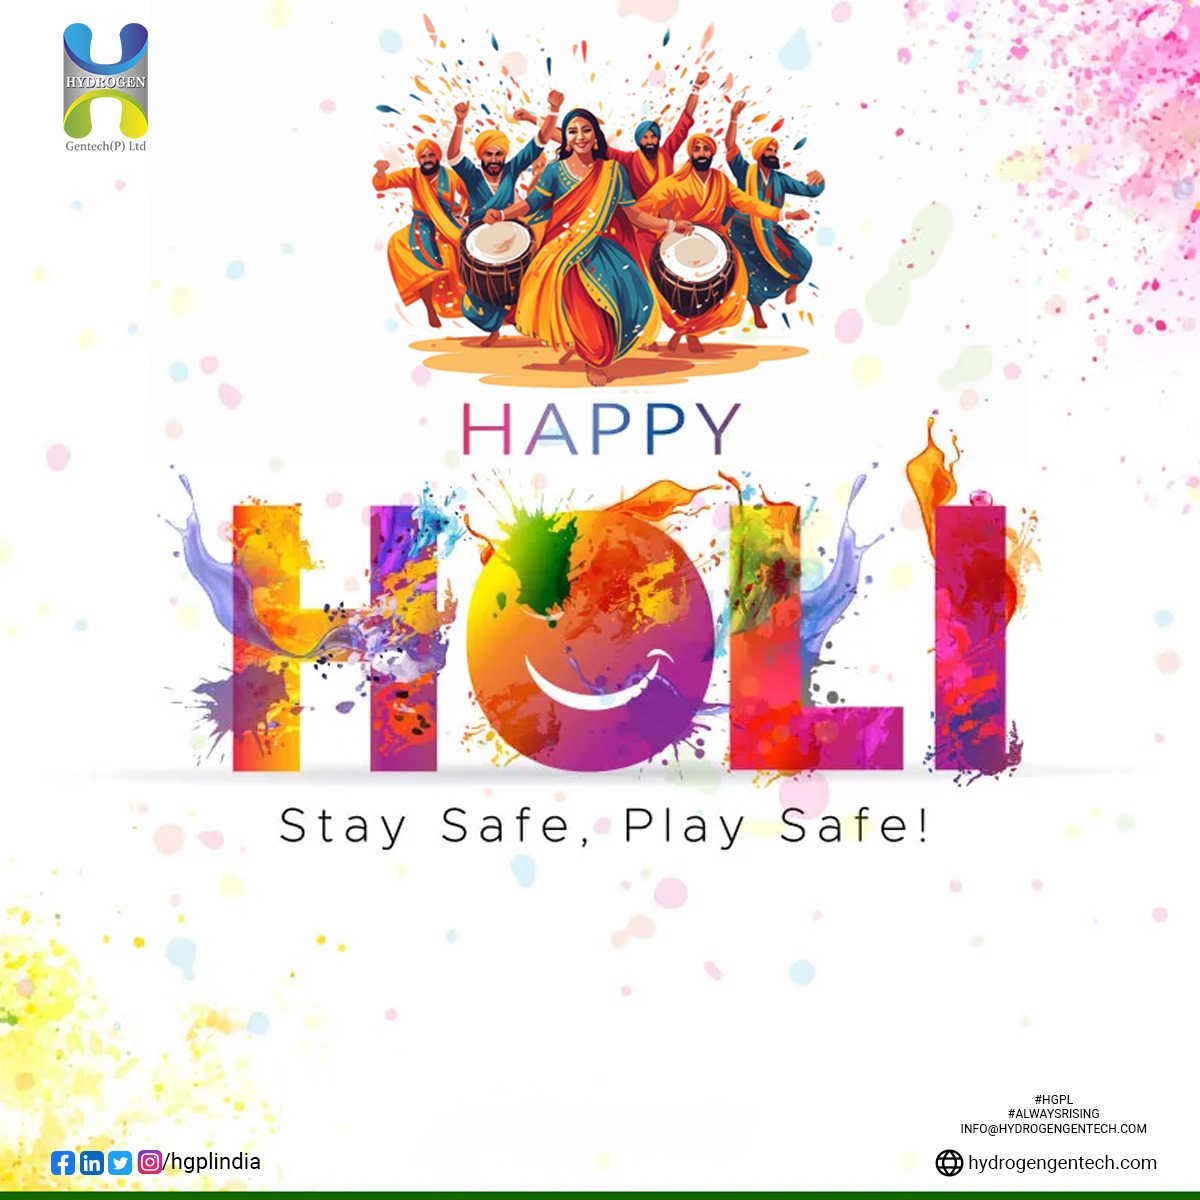 May your day be filled with colorful joy and happiness. Let us celebrate the Festival of Colors together and spread love and laughter. Wishing you and your loved ones a very happy Holi.